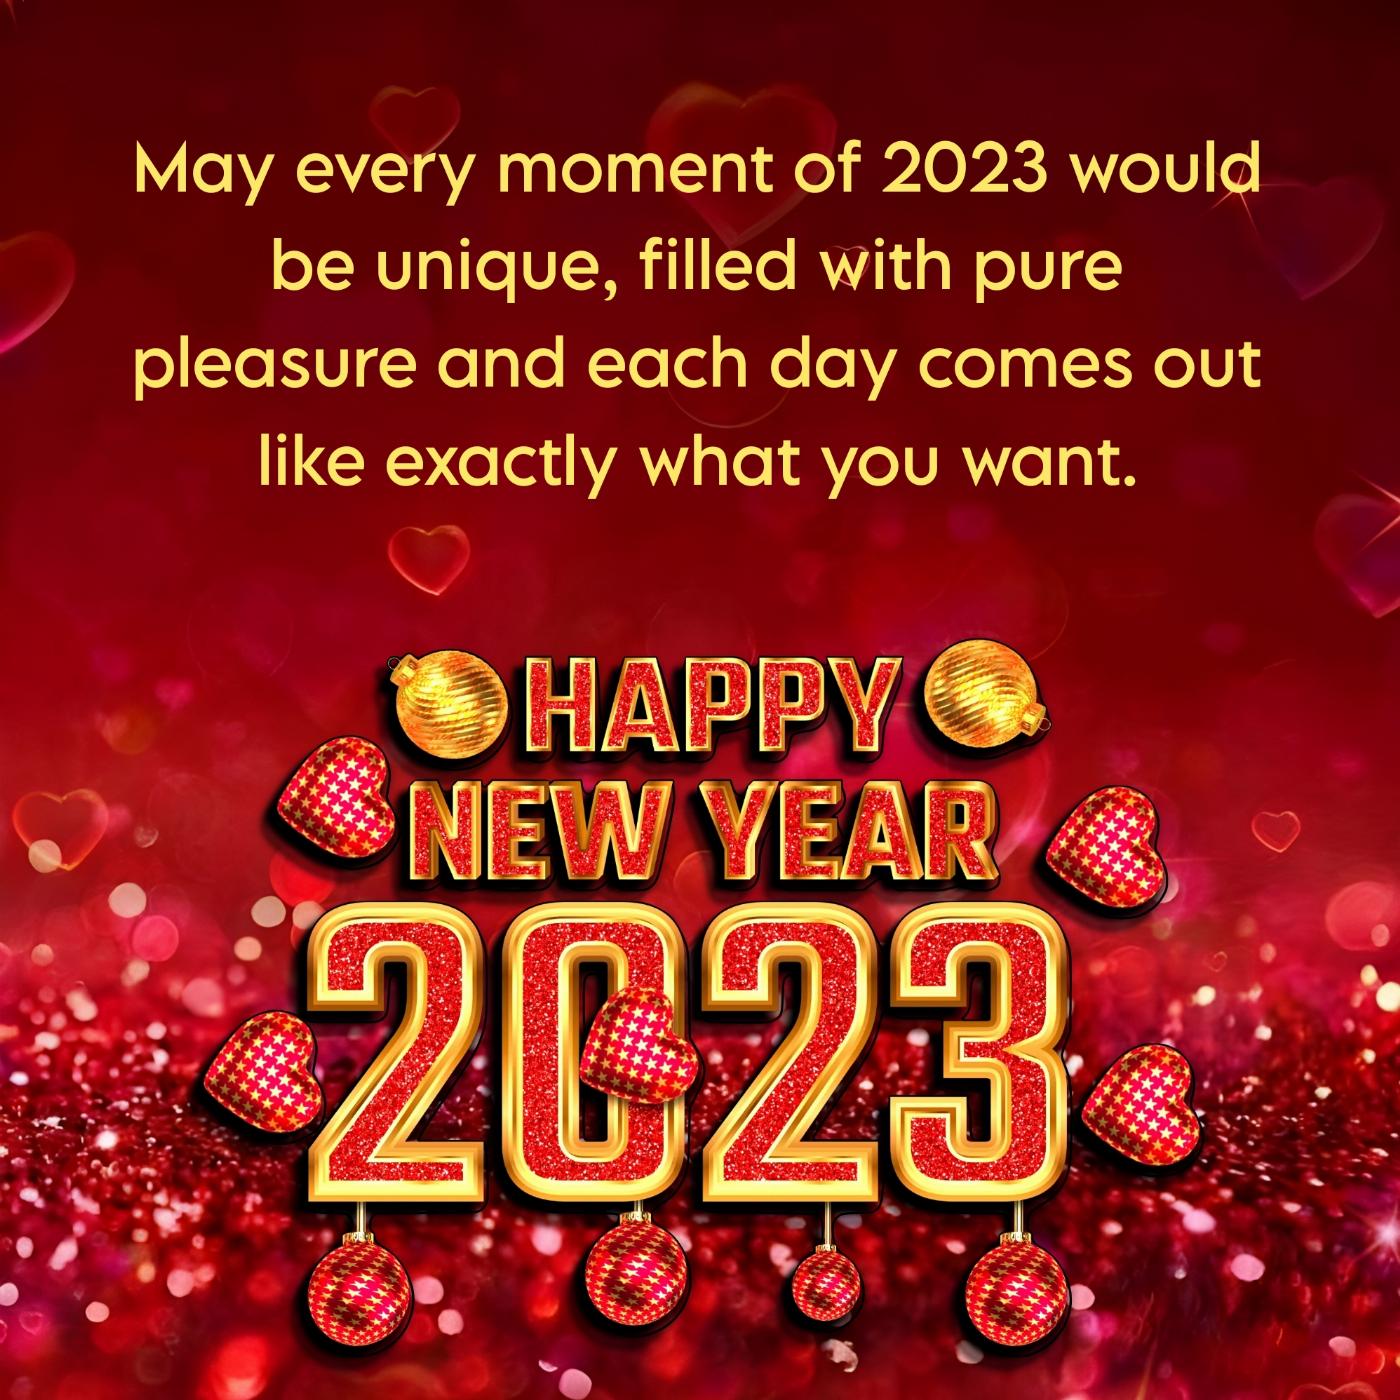 May every moment of 2023 would be unique filled with pure pleasure